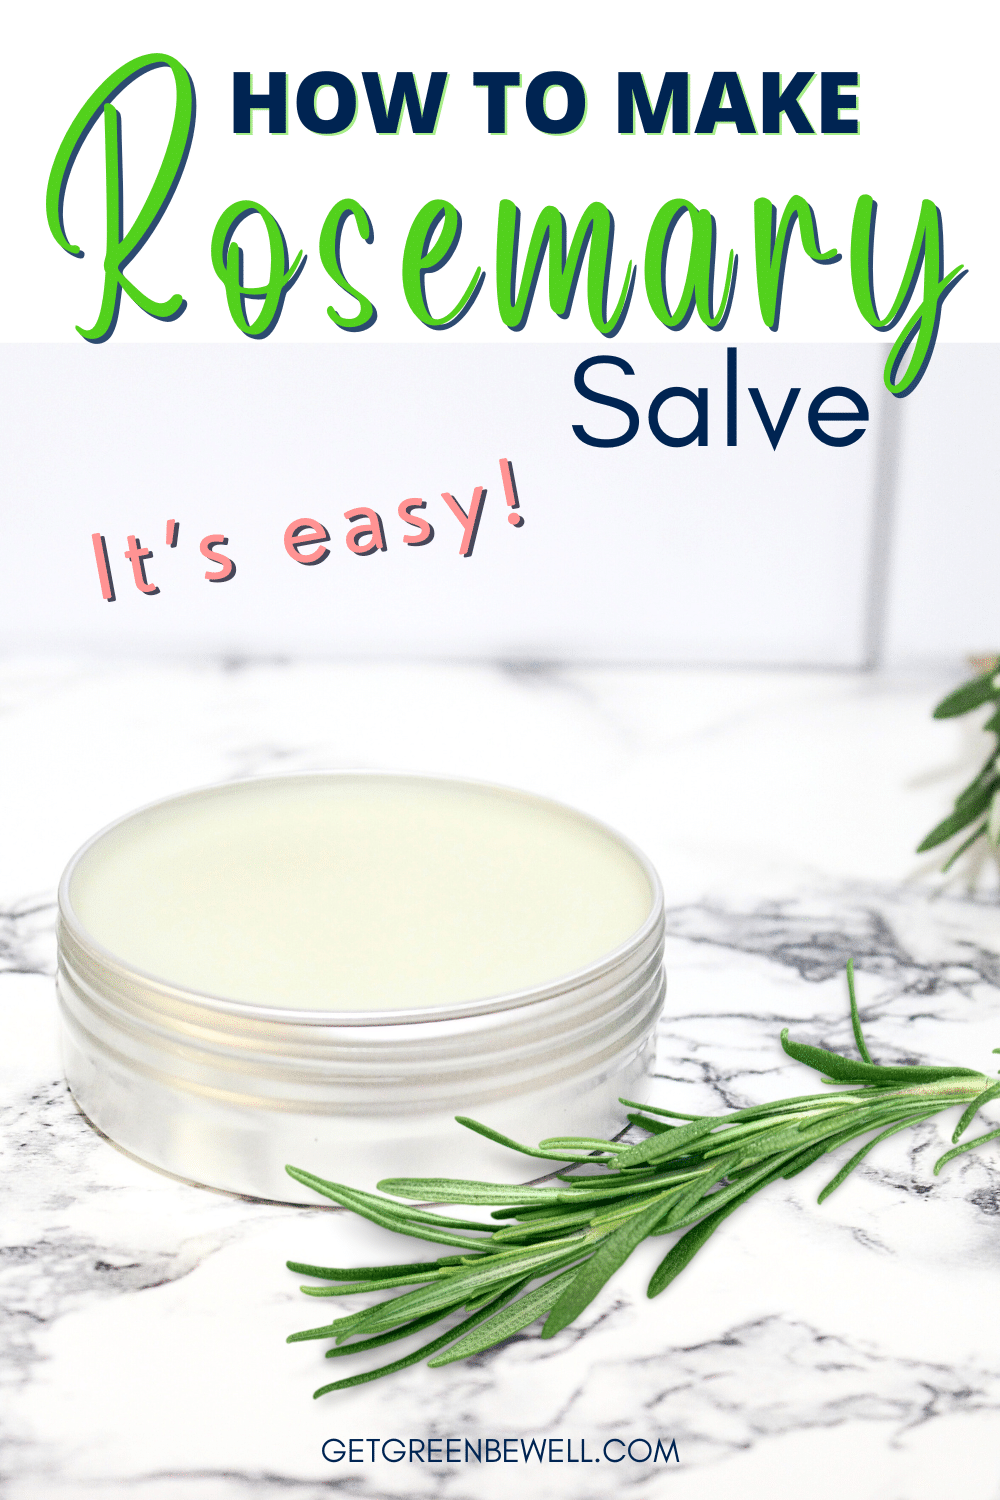 Making a rosemary salve is an easy process that can yield effective results.